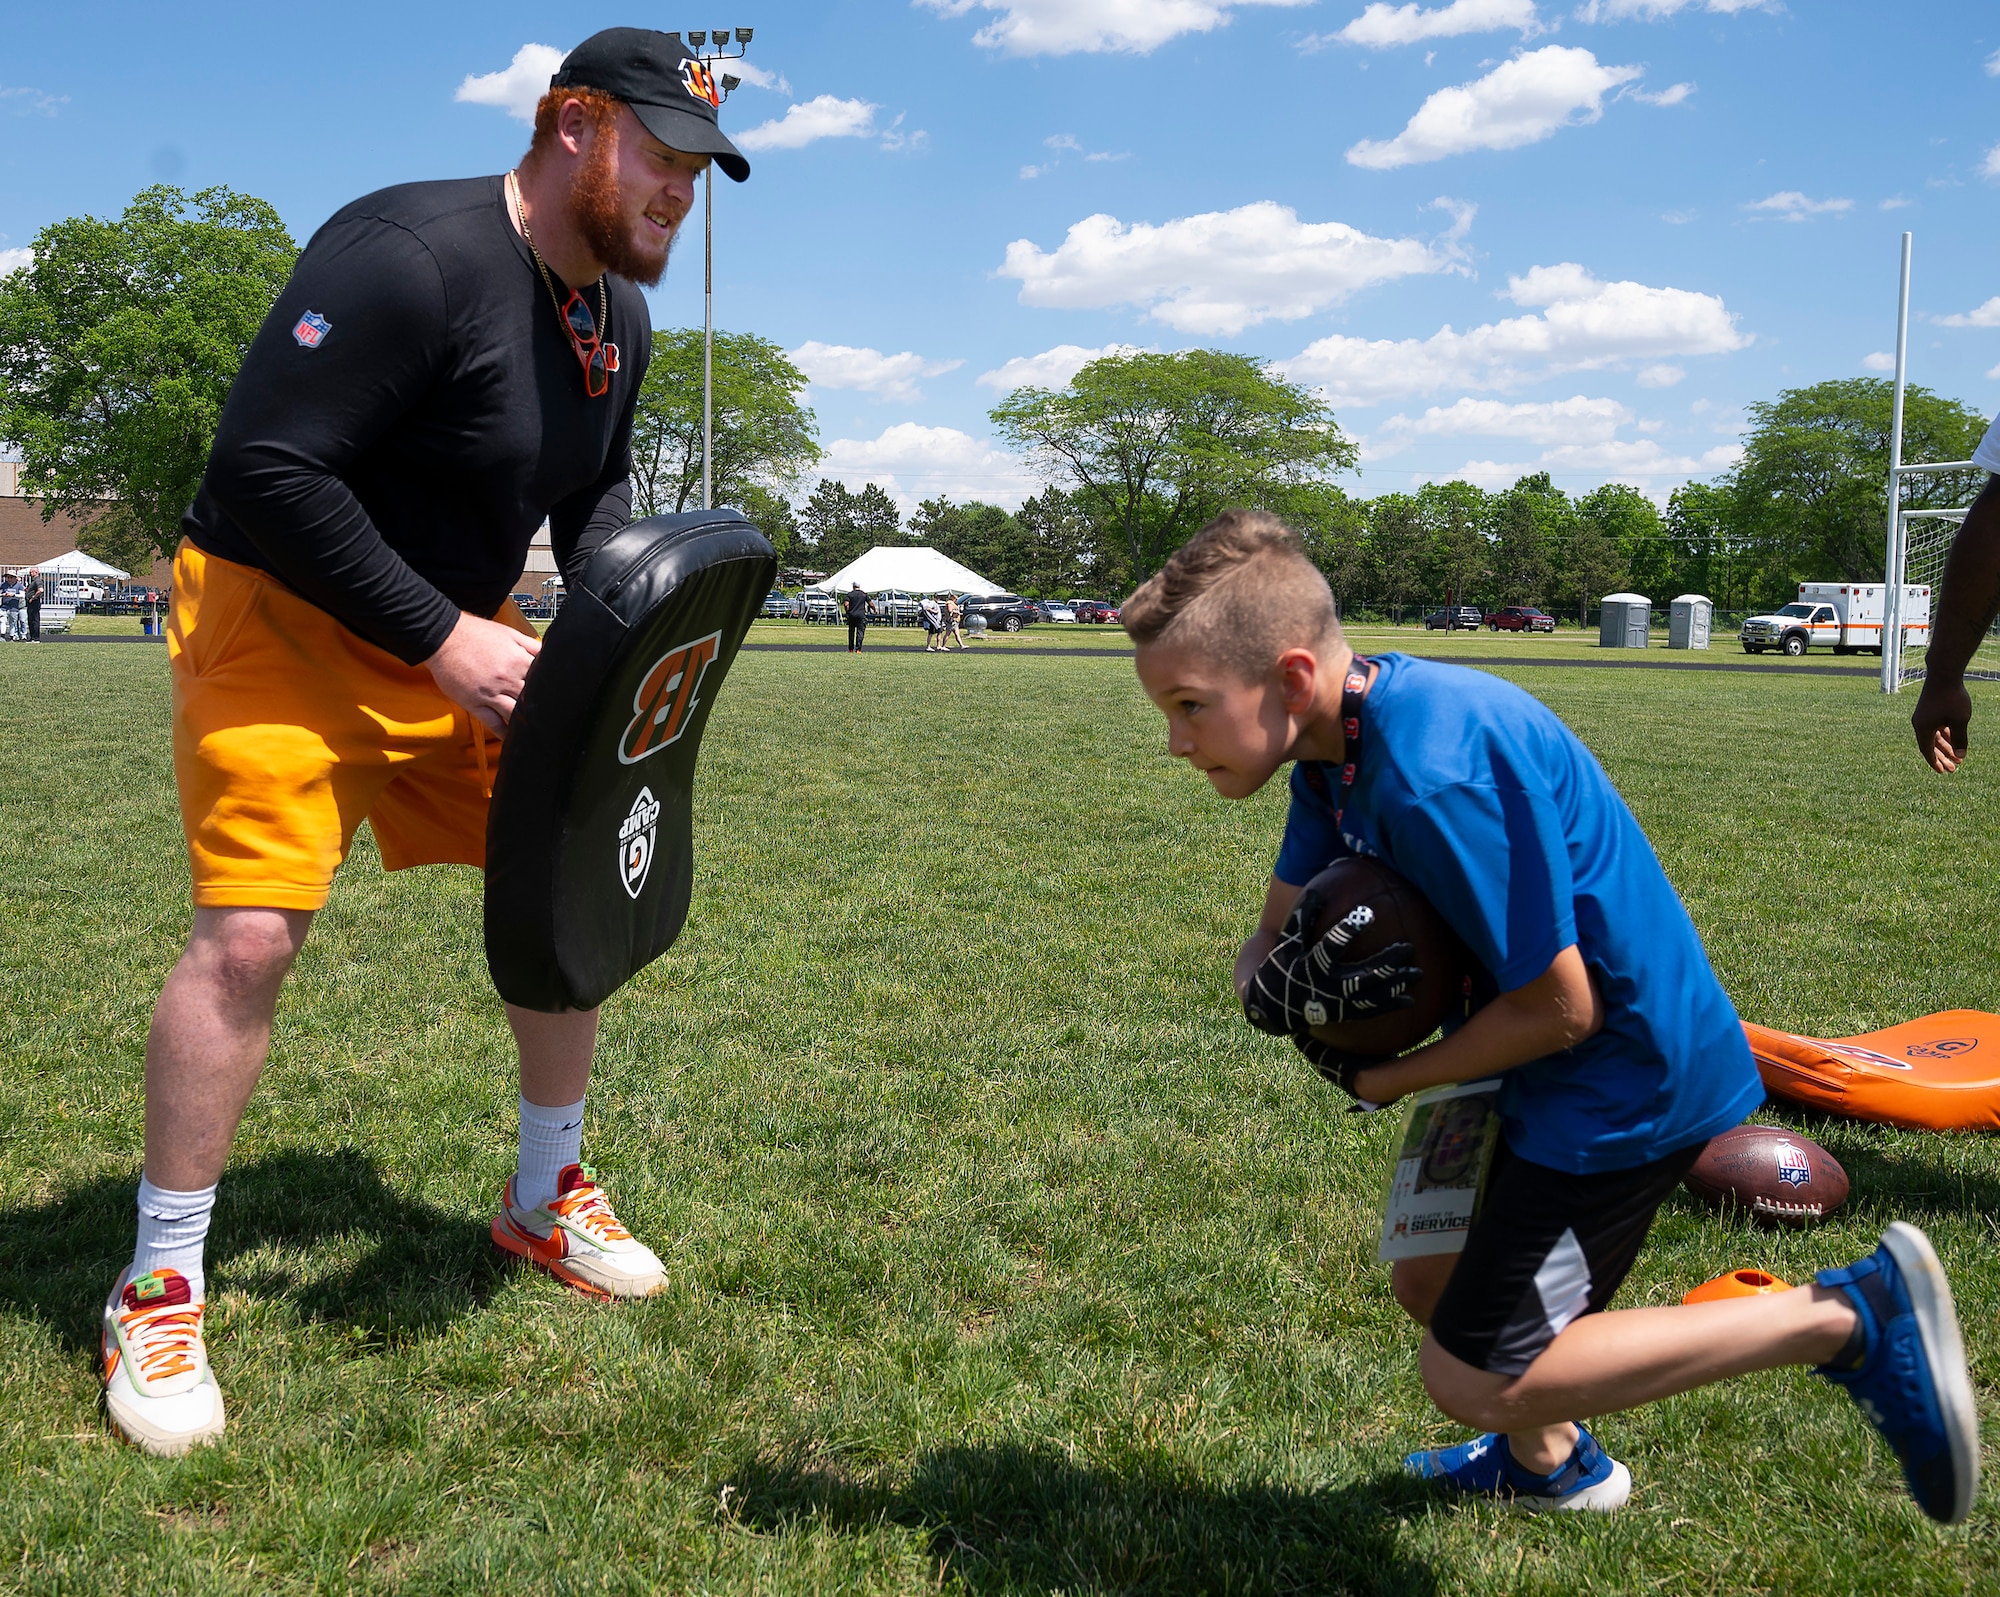 Cincinnati Bengal guard Desmond Noel
works with a participant in the
USO-sponsored Bengals’ skill clinic June 3,
2022, at Wright-Patterson Air Force Base,
Ohio. A group of Bengal rookies had lunch
with Airmen, toured the base and took part
in the skill clinic that had 99 Wright-Patt
children enrolled. (U.S. Air Force photo by
R.J. Oriez)